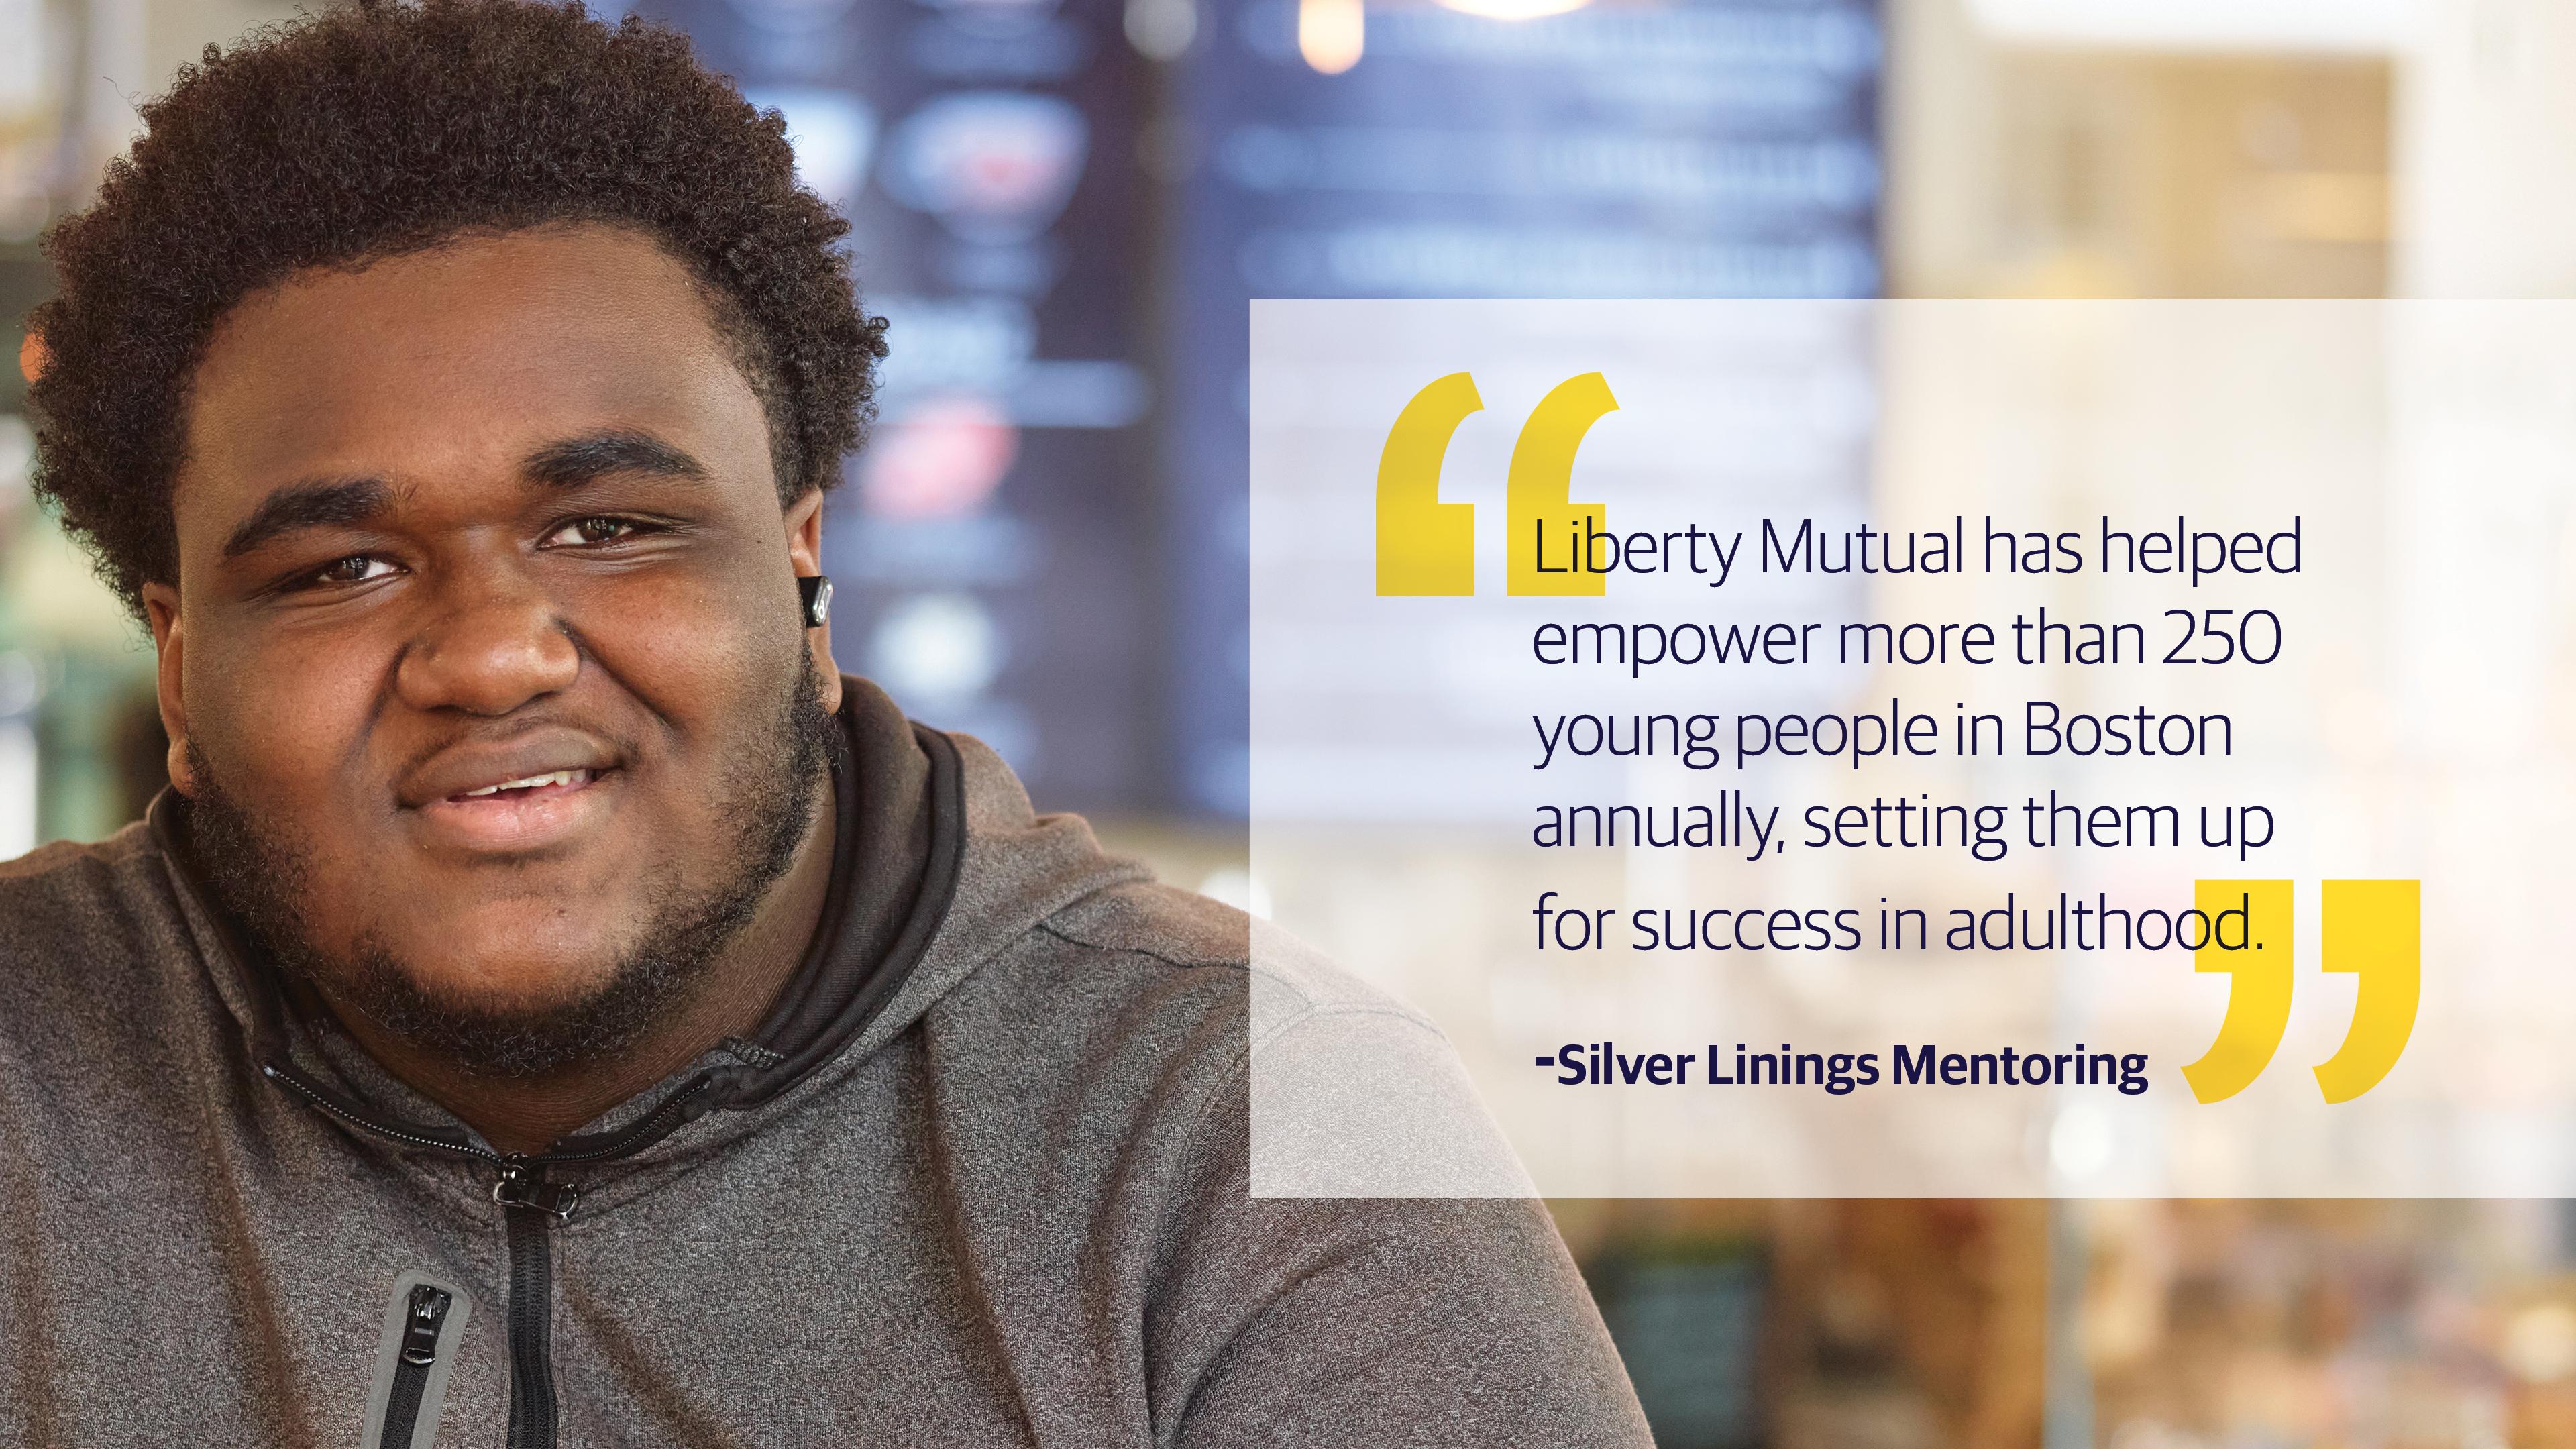 (slide 3 of 3) "Liberty Mutual has helped empower more than 250 young people in Boston annually, setting them up for success in adulthood." - Silver Linings Mentoring. 